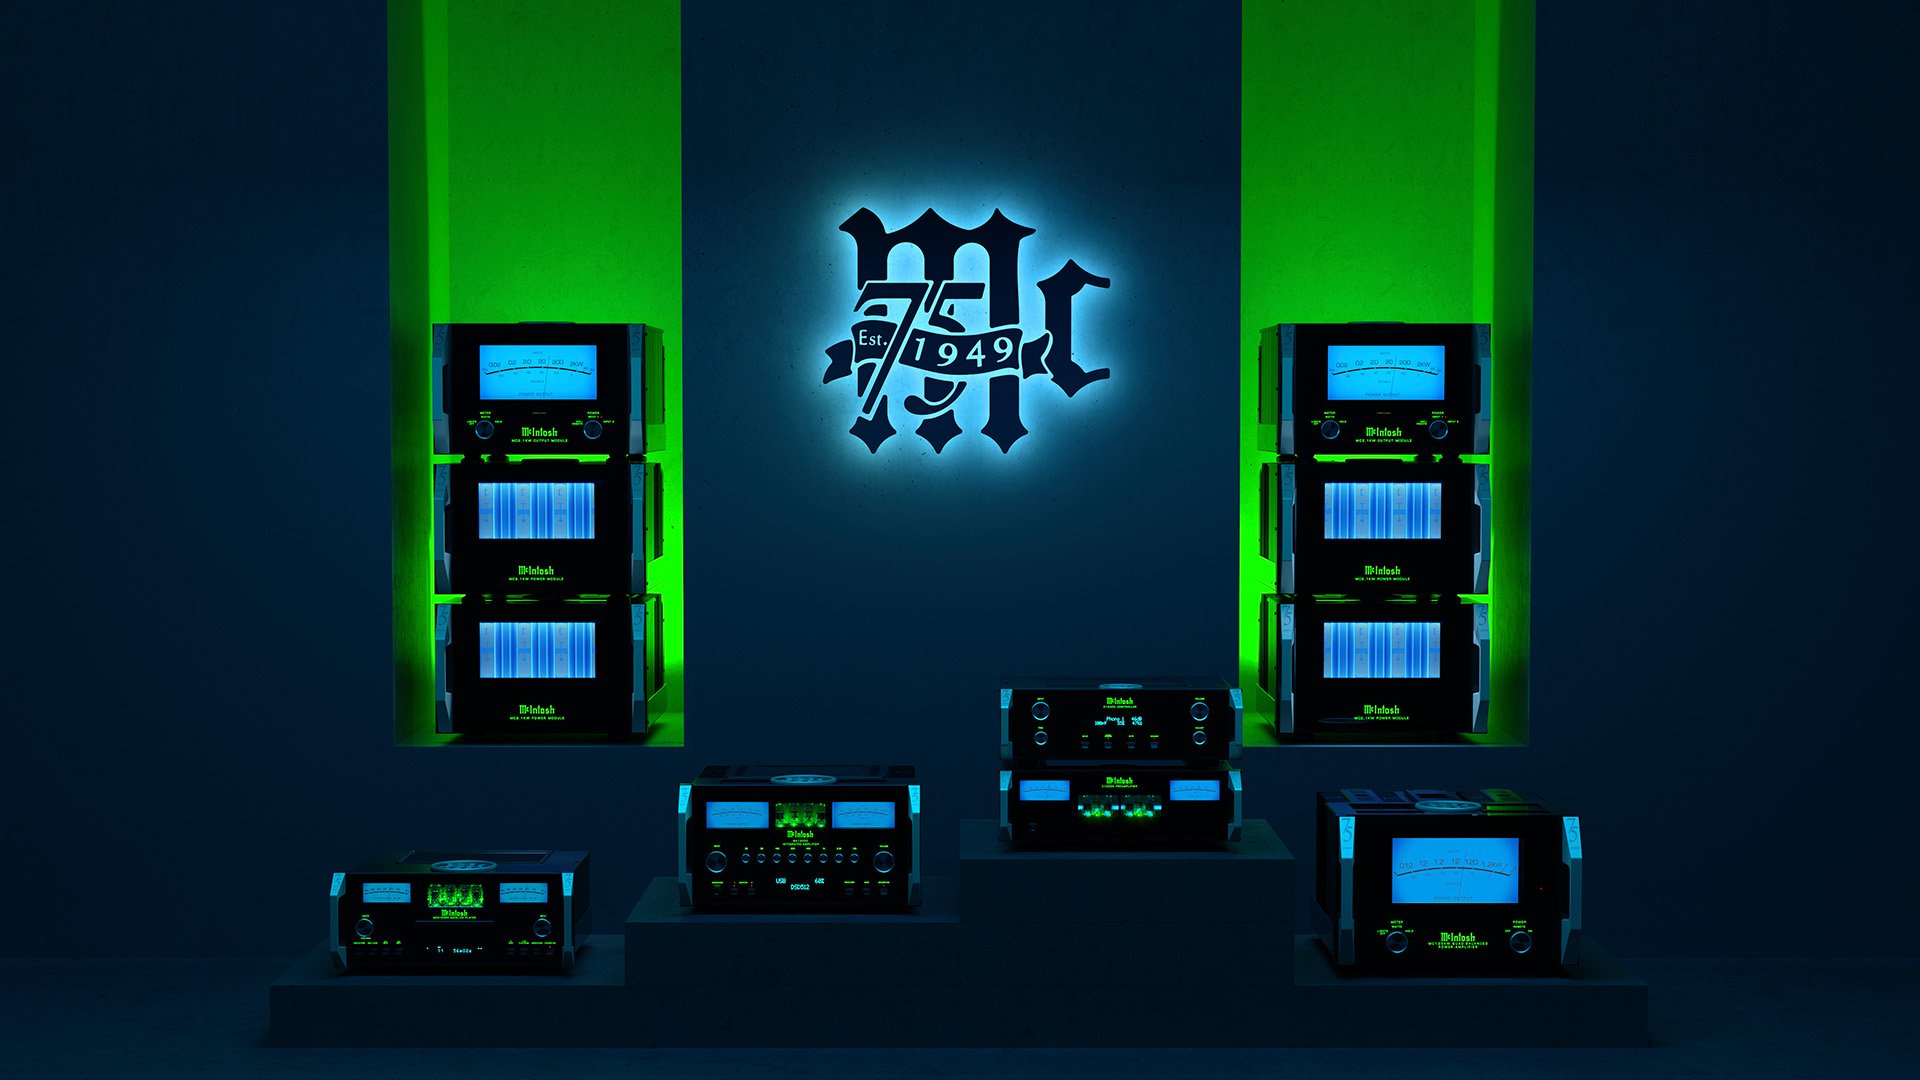 McIntosh 75th Anniversary products